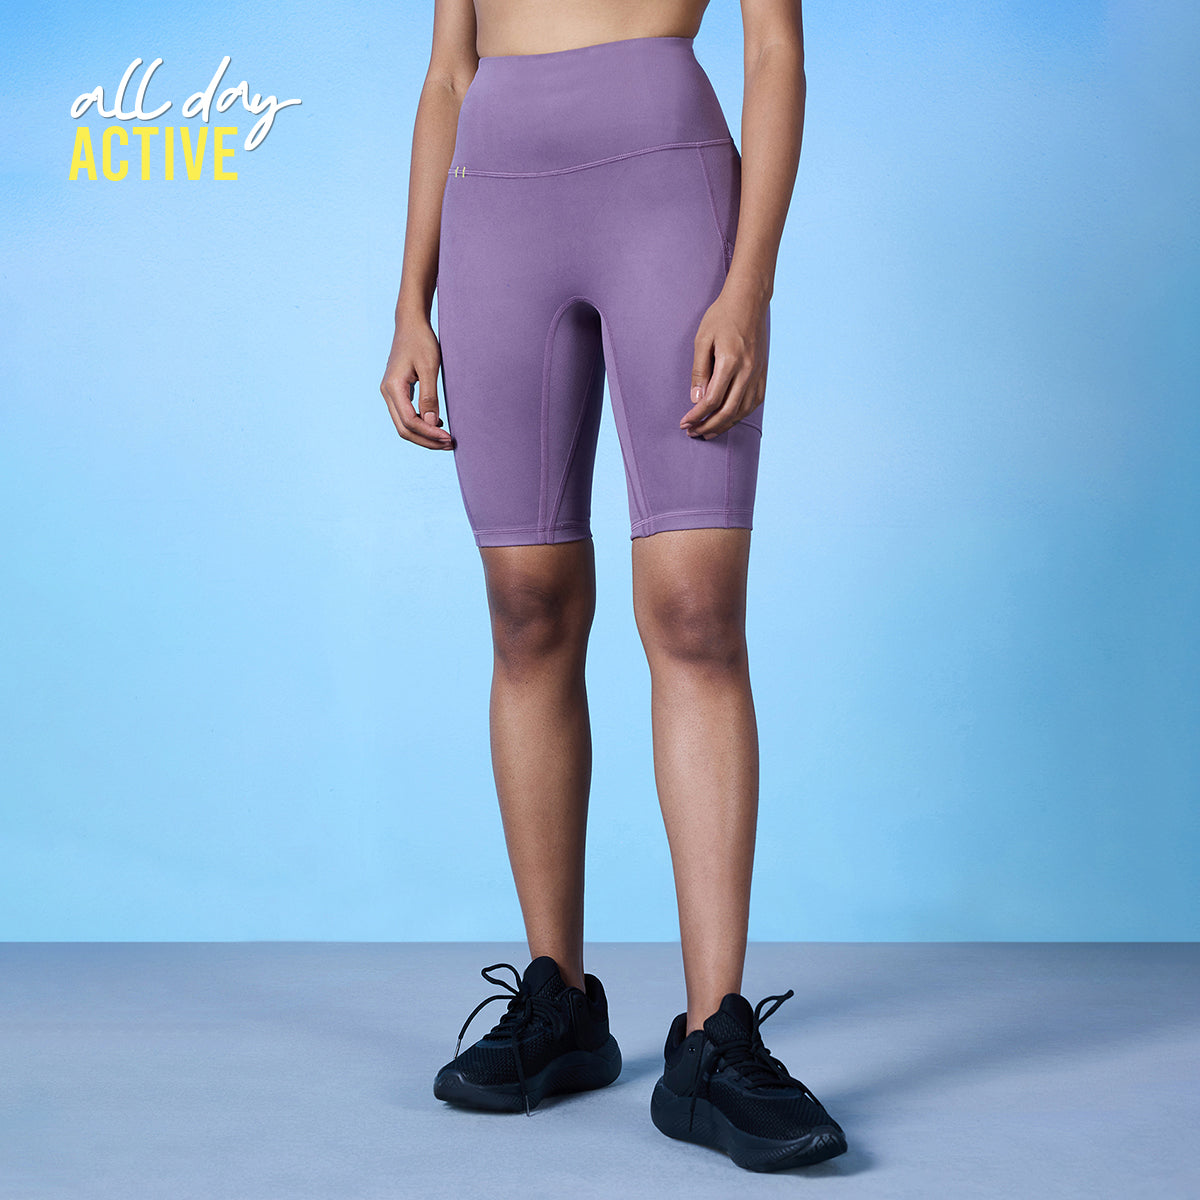 Iconic All Day Cycling short NYK113 & Sports Bra- NYK310- Arctic Dusk co-ord set